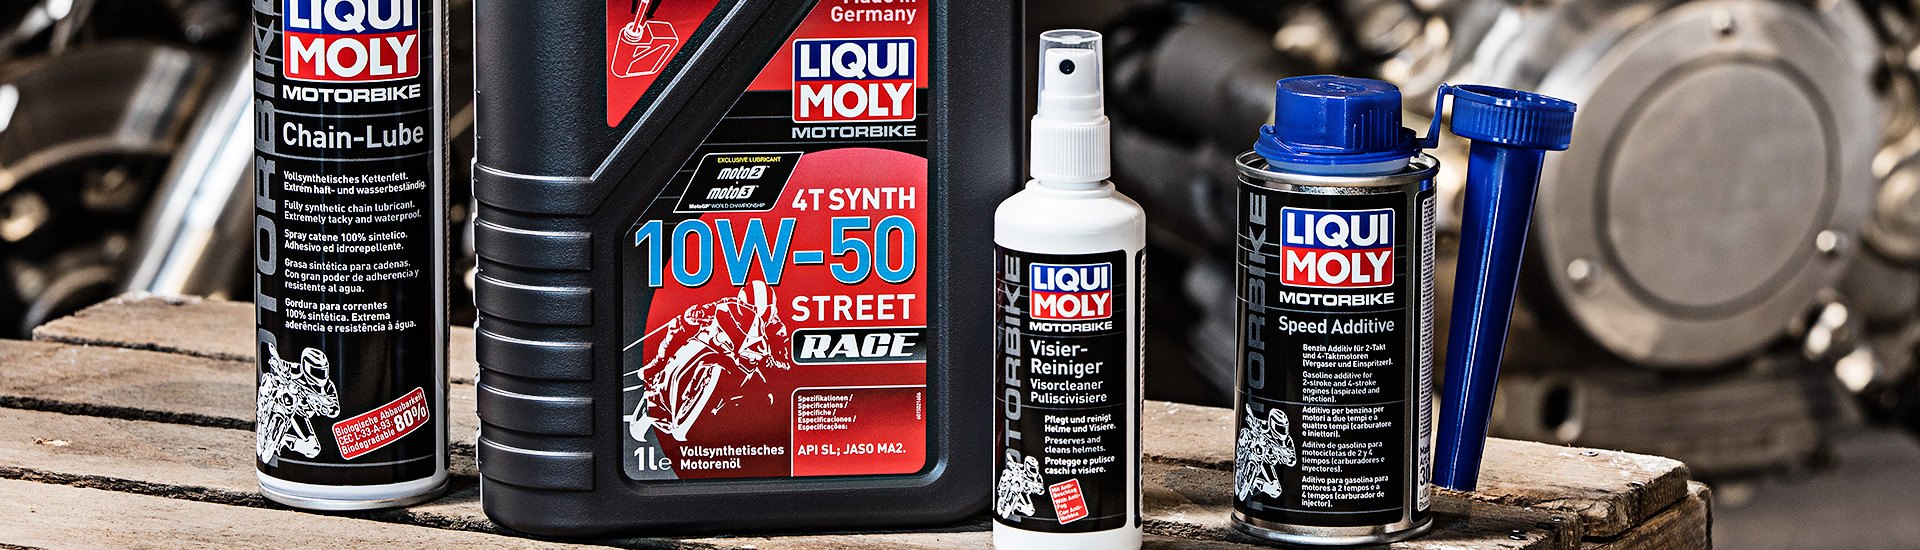 Motorcycle Oils & Chemicals